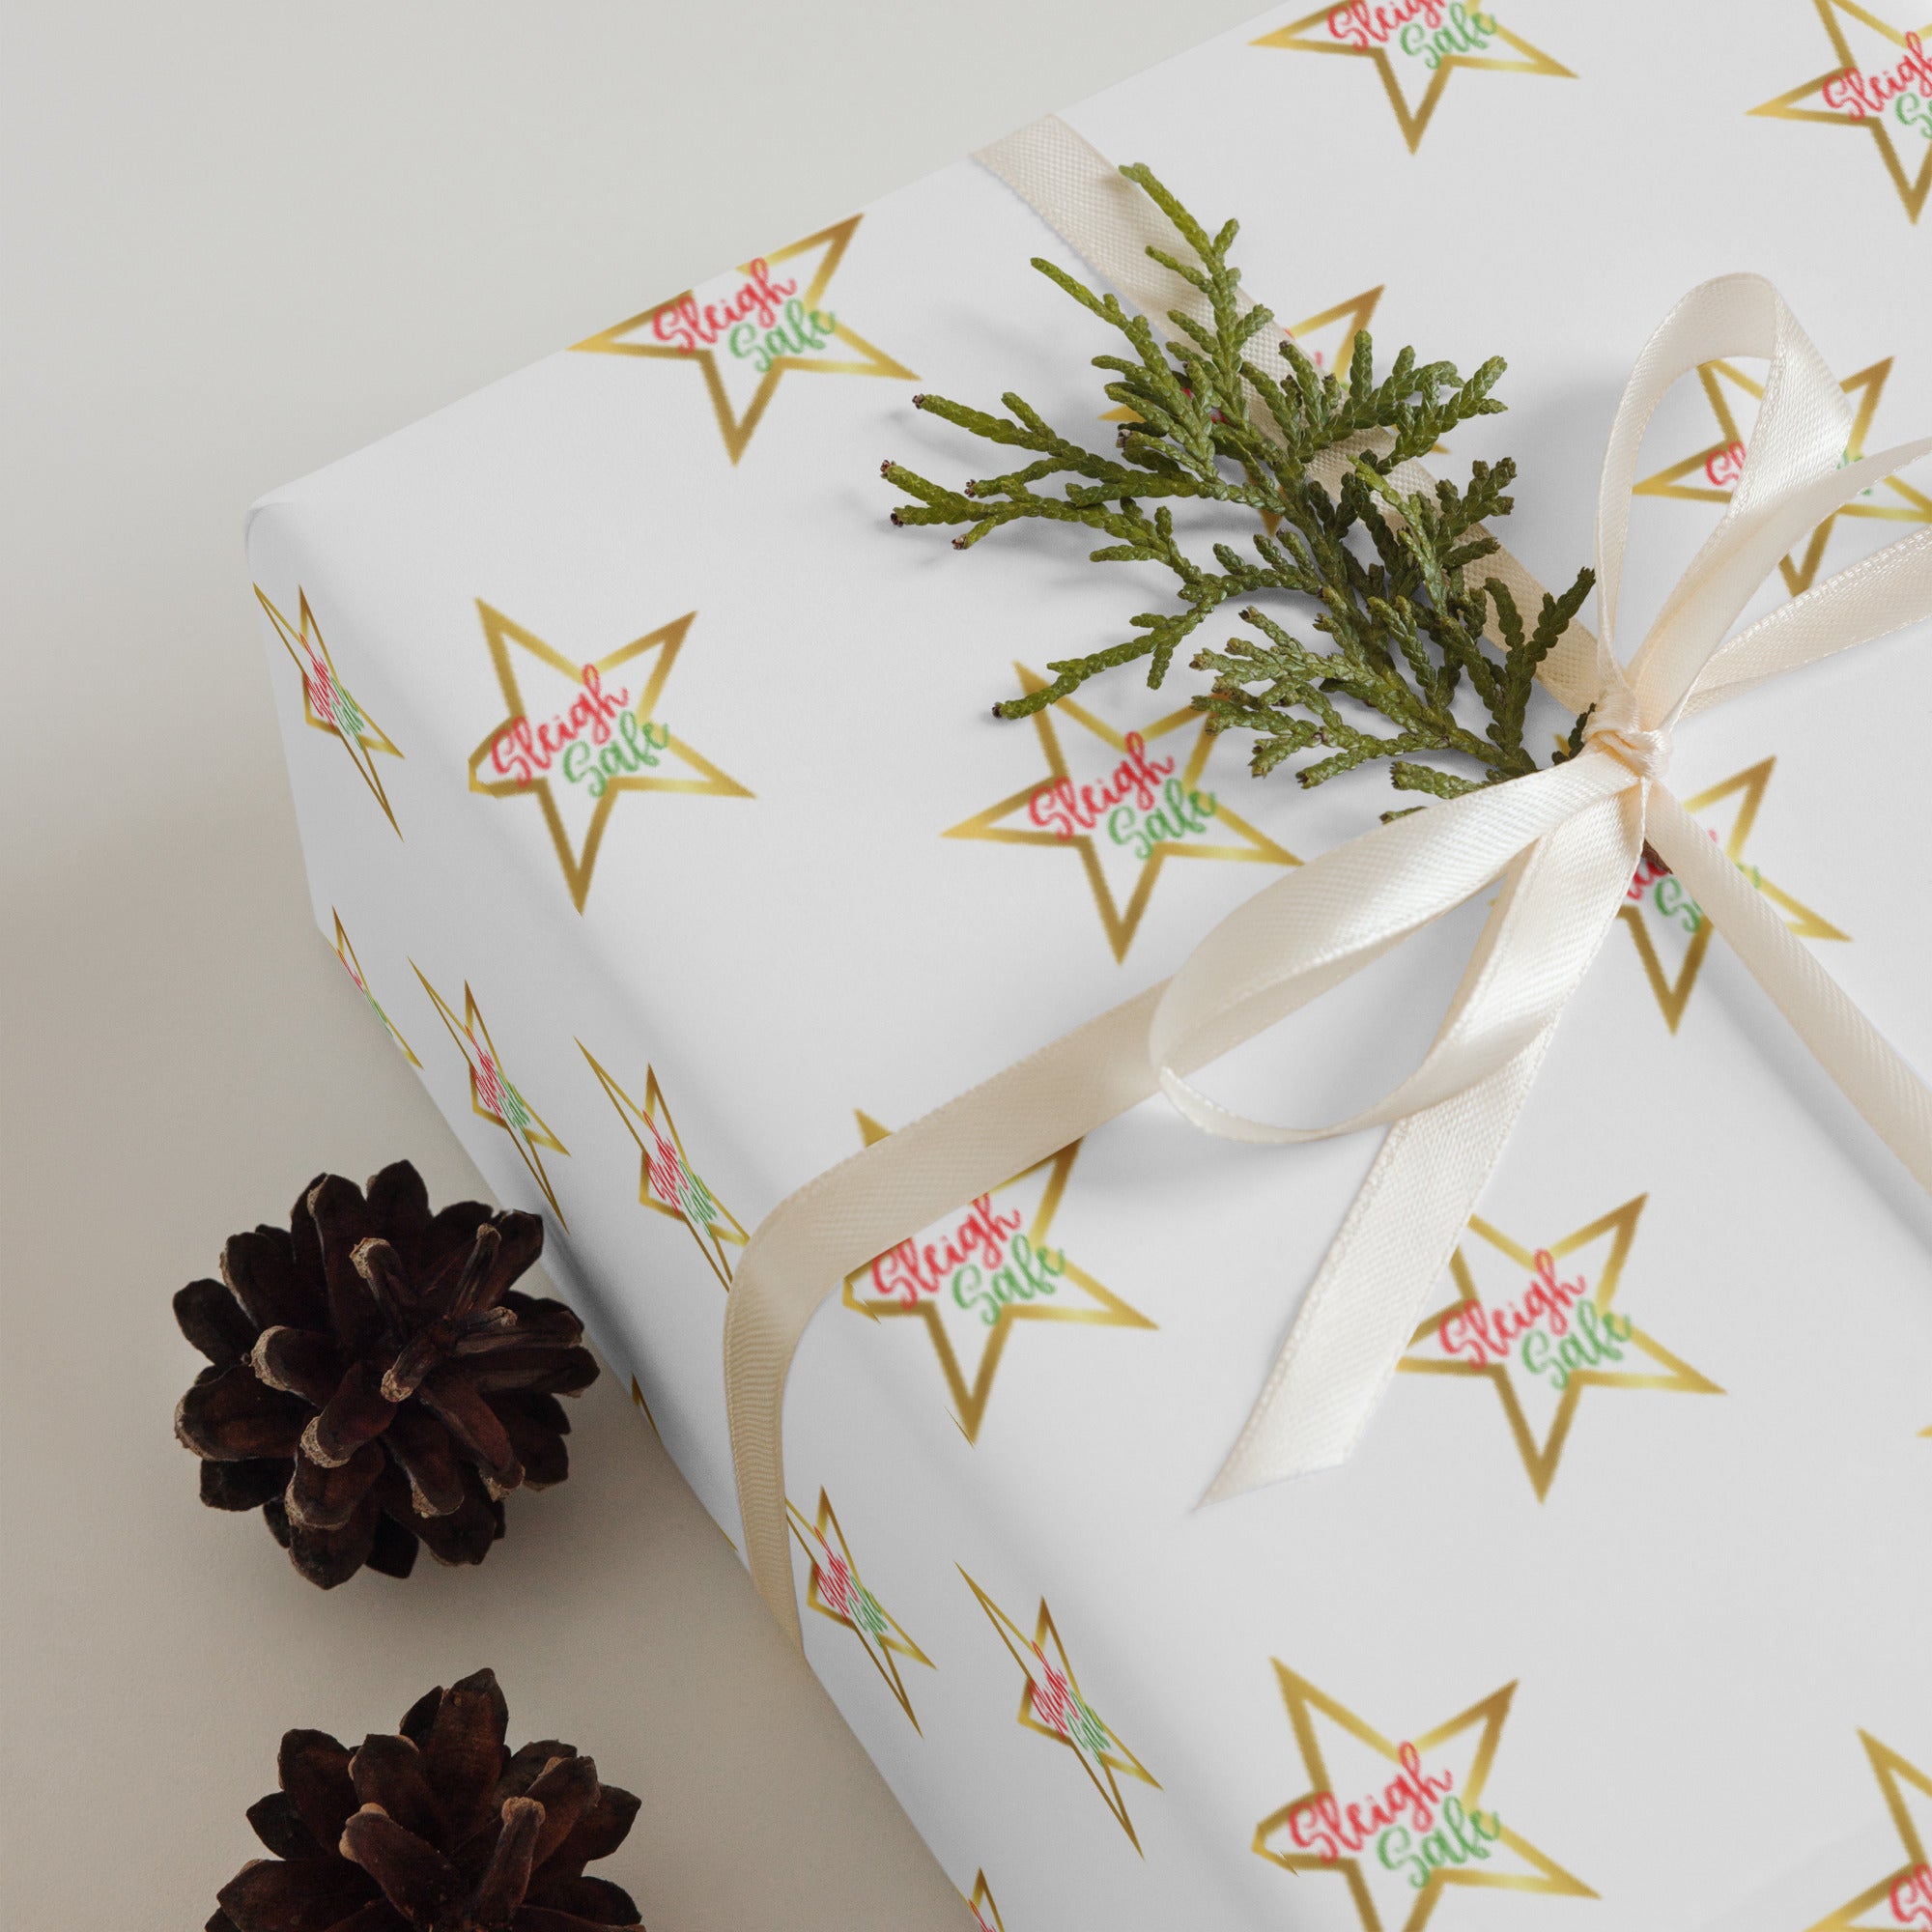 Sleigh Safe - Wrapping Paper Sheets – Inspire Safety